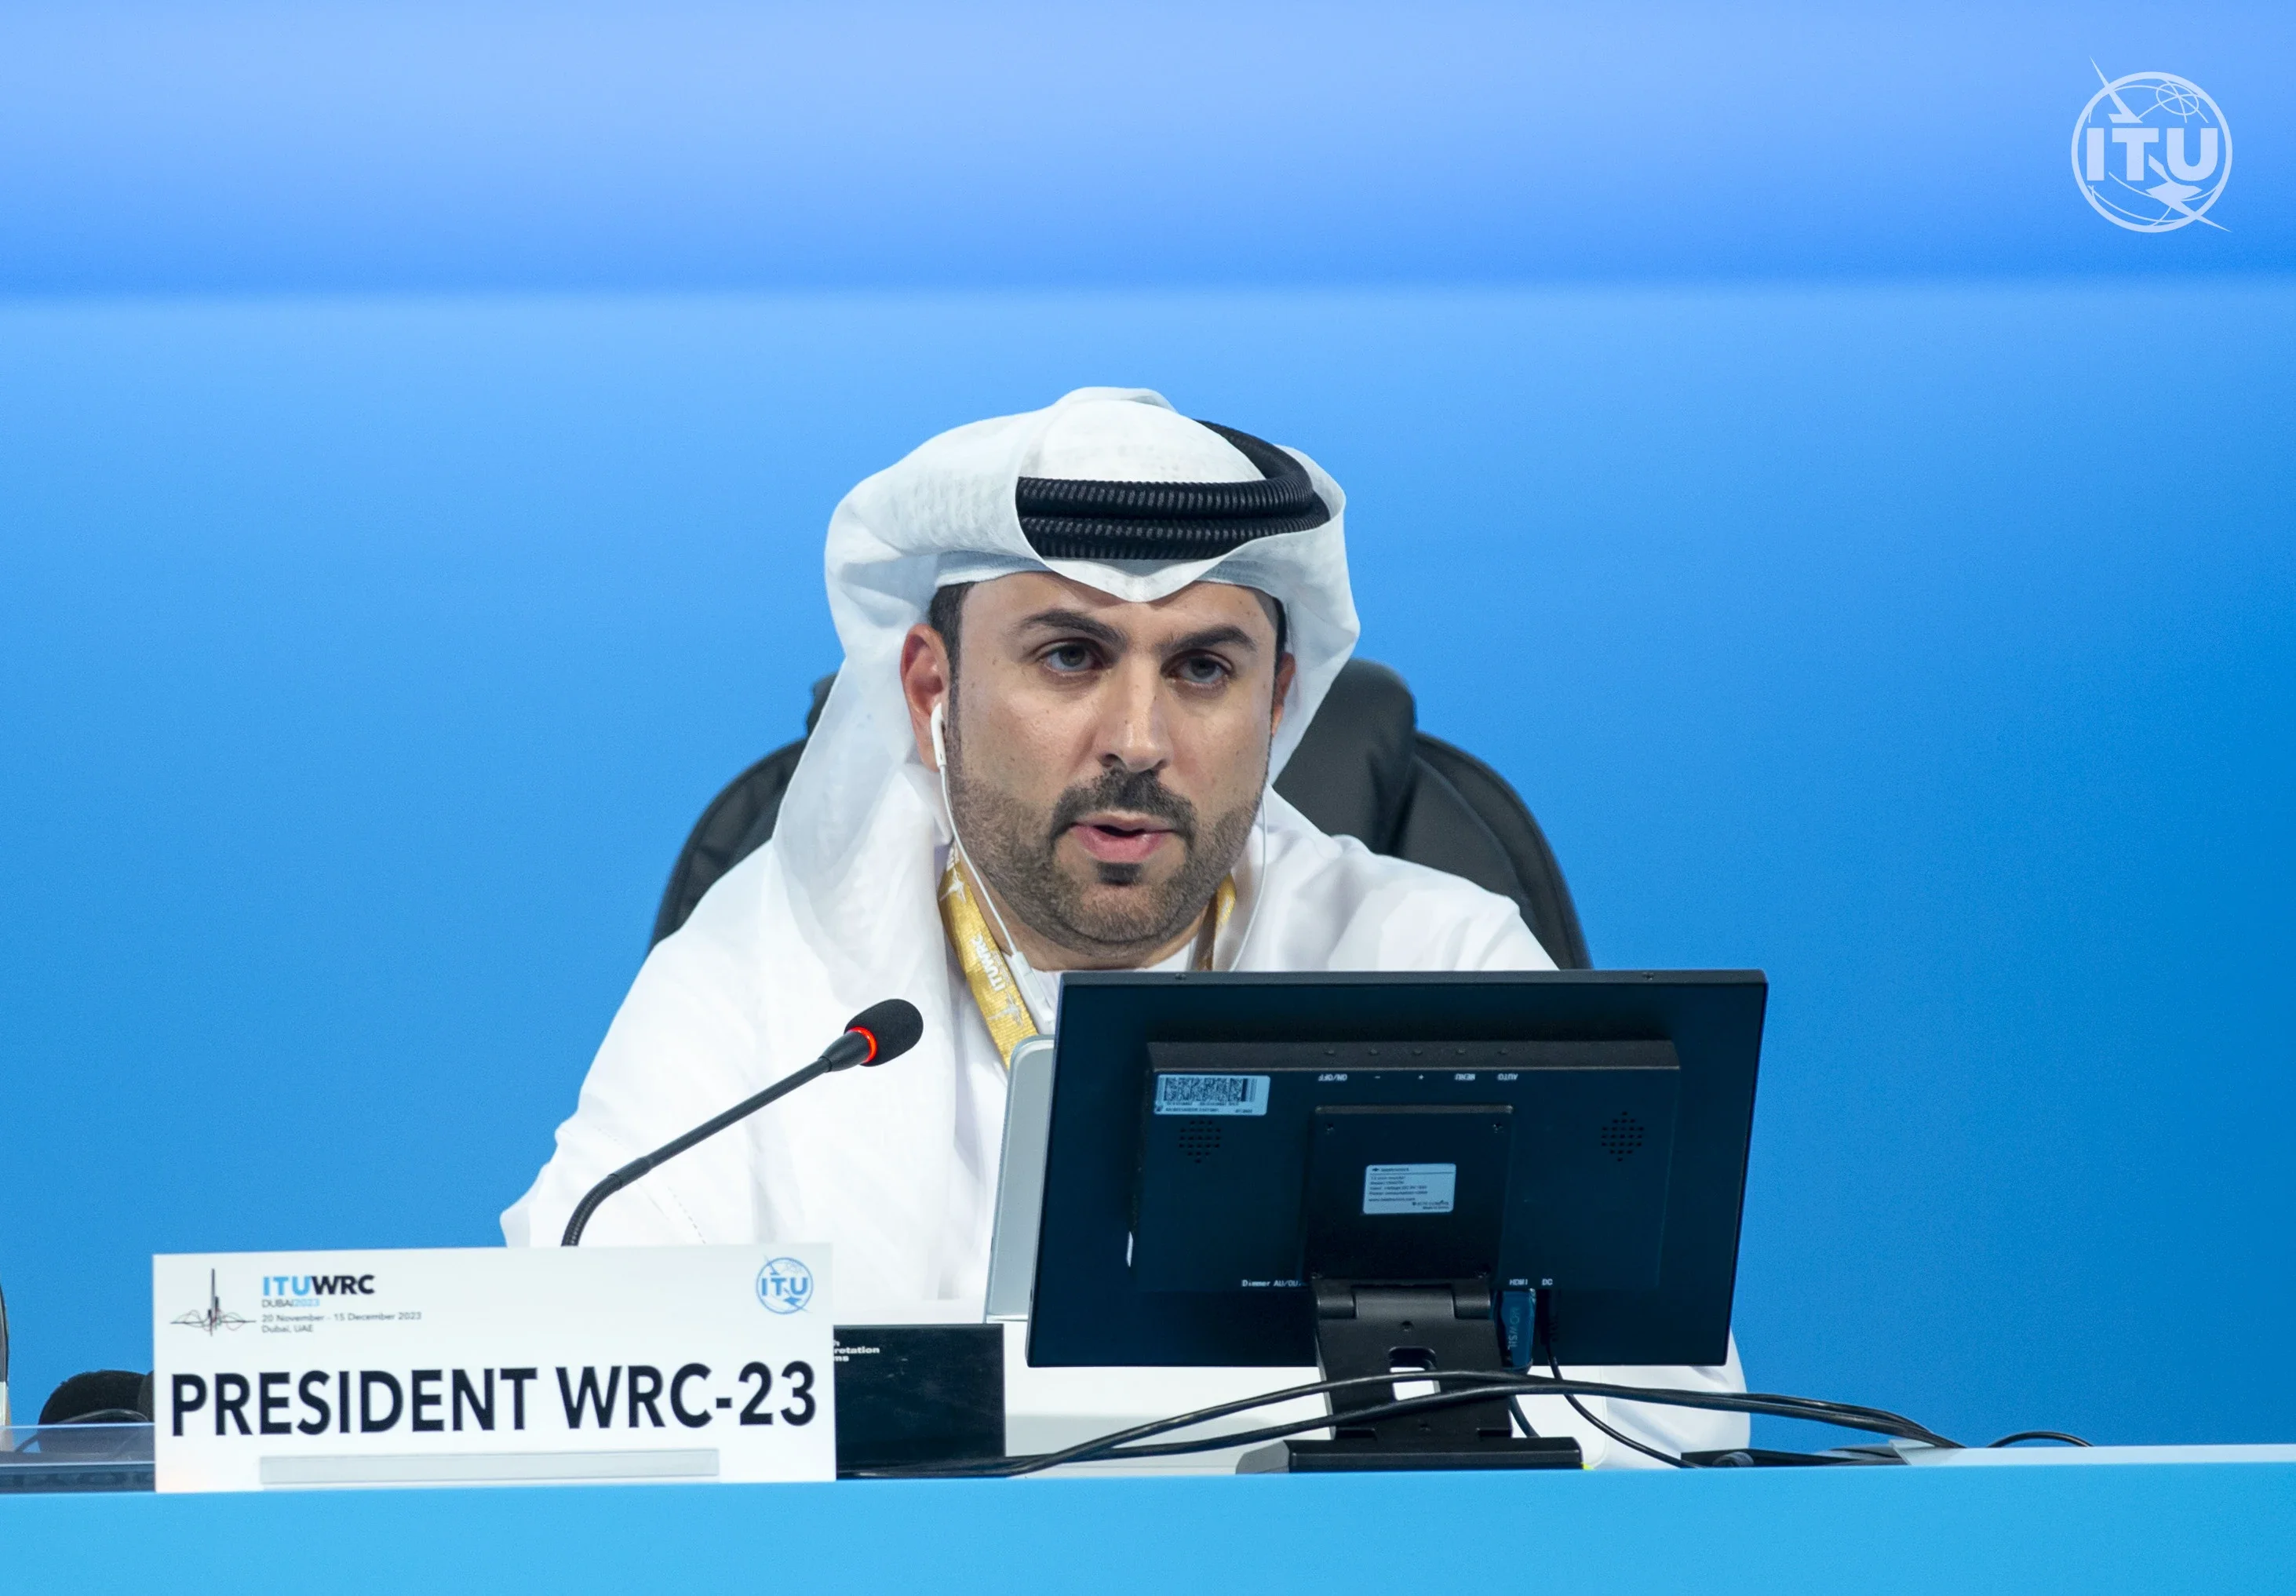 World Radiocommunication Conference 2023 appoints UAE's Mohammed Al Ramsi as Chairman